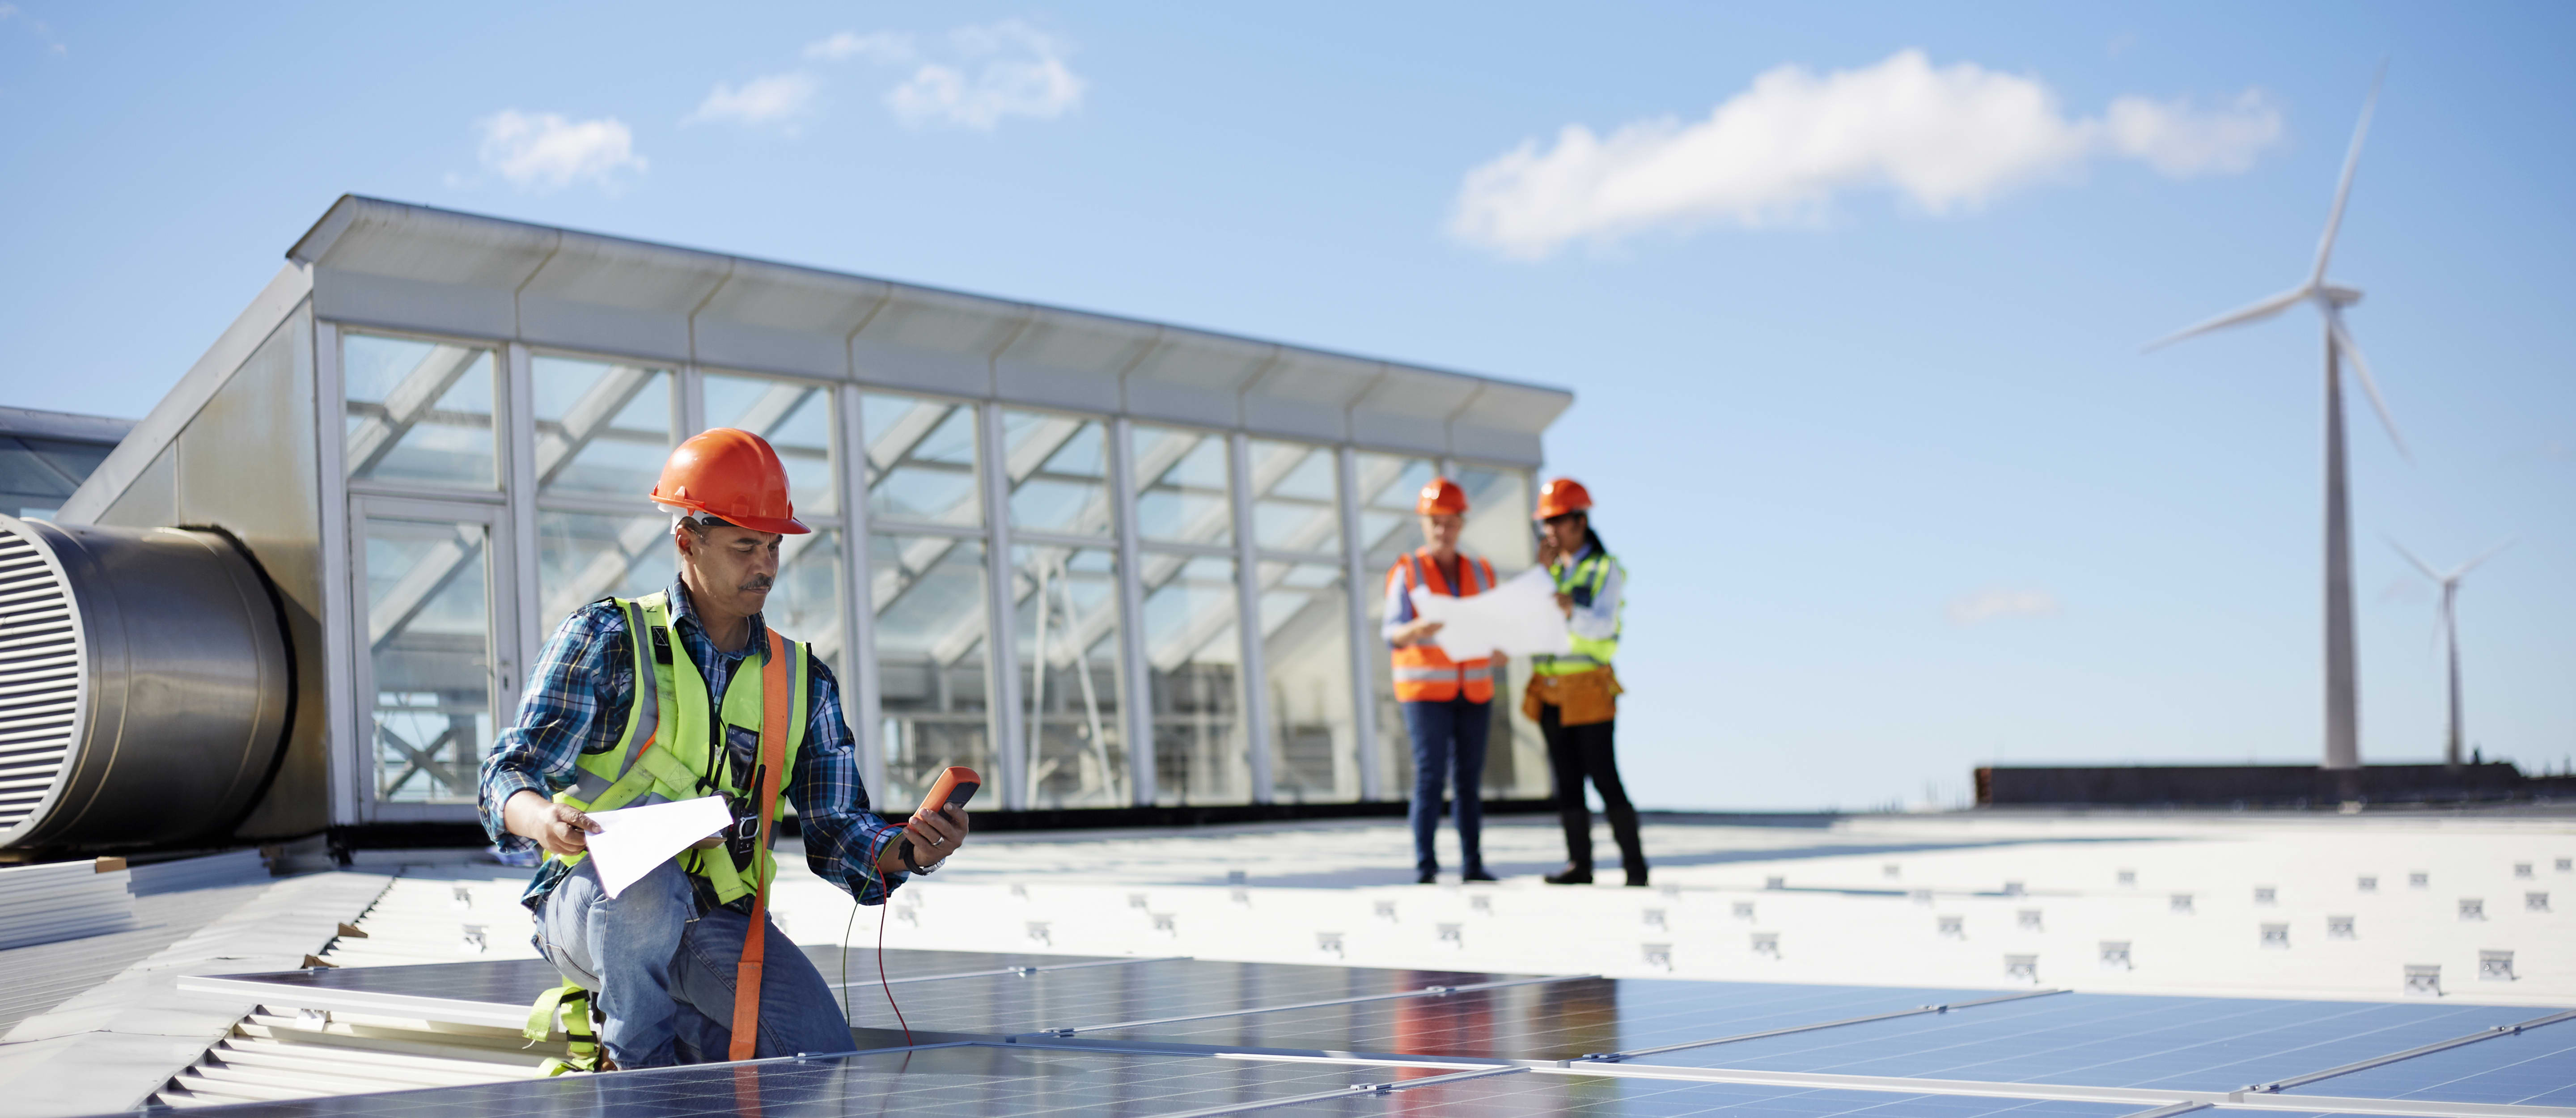 A group of engineers in hard hats test solar panels